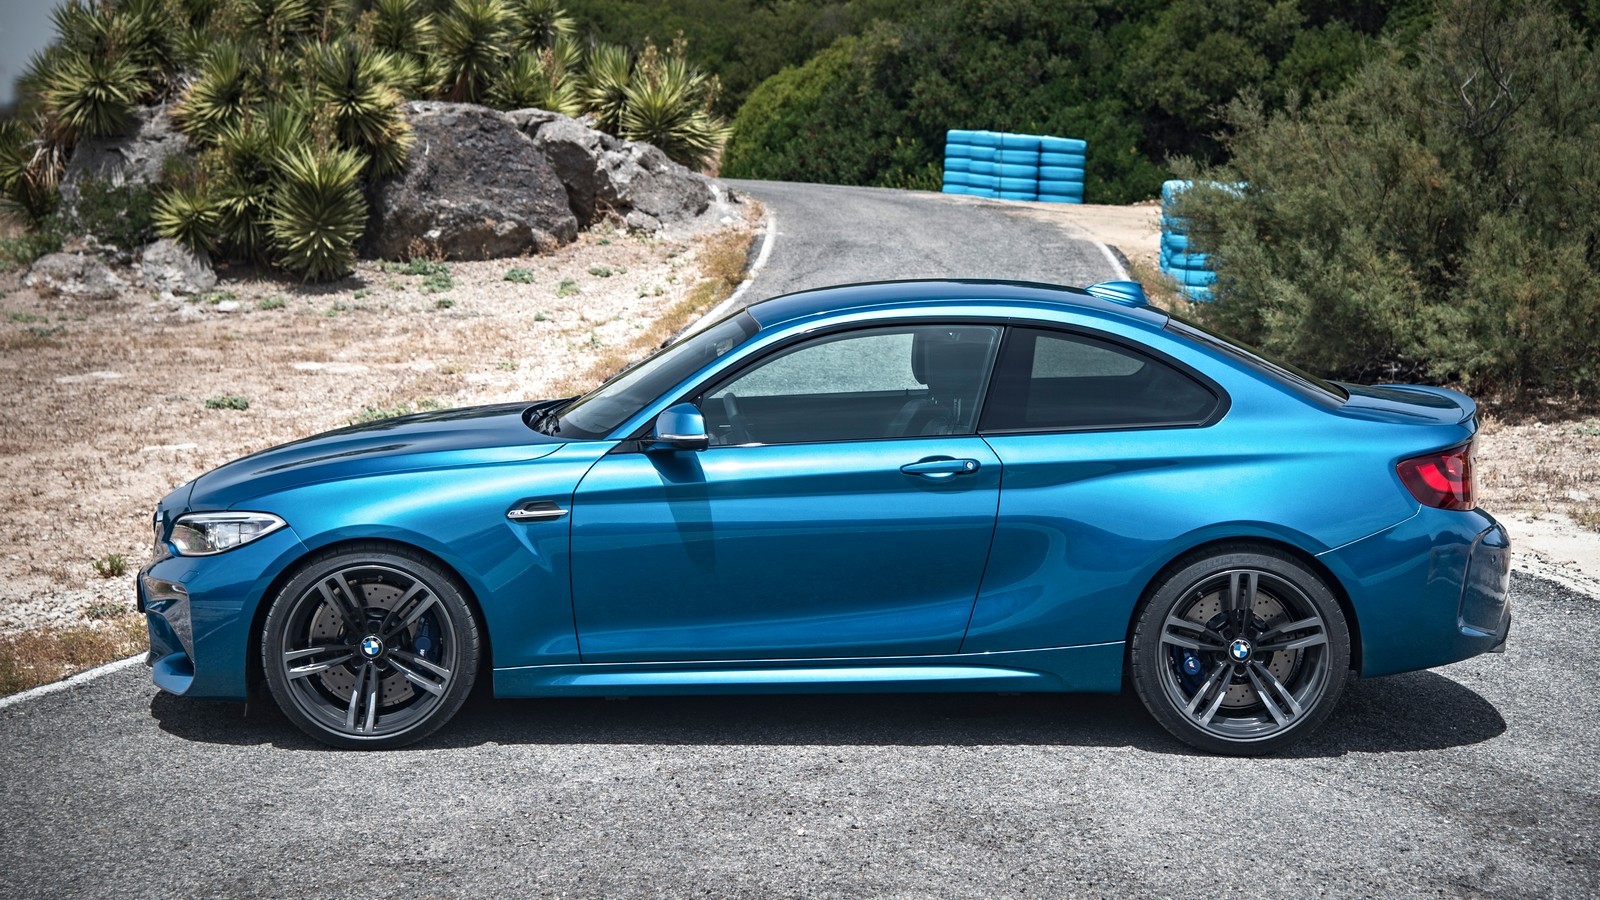 P90199662_highRes_the-new-bmw-m2-coupe